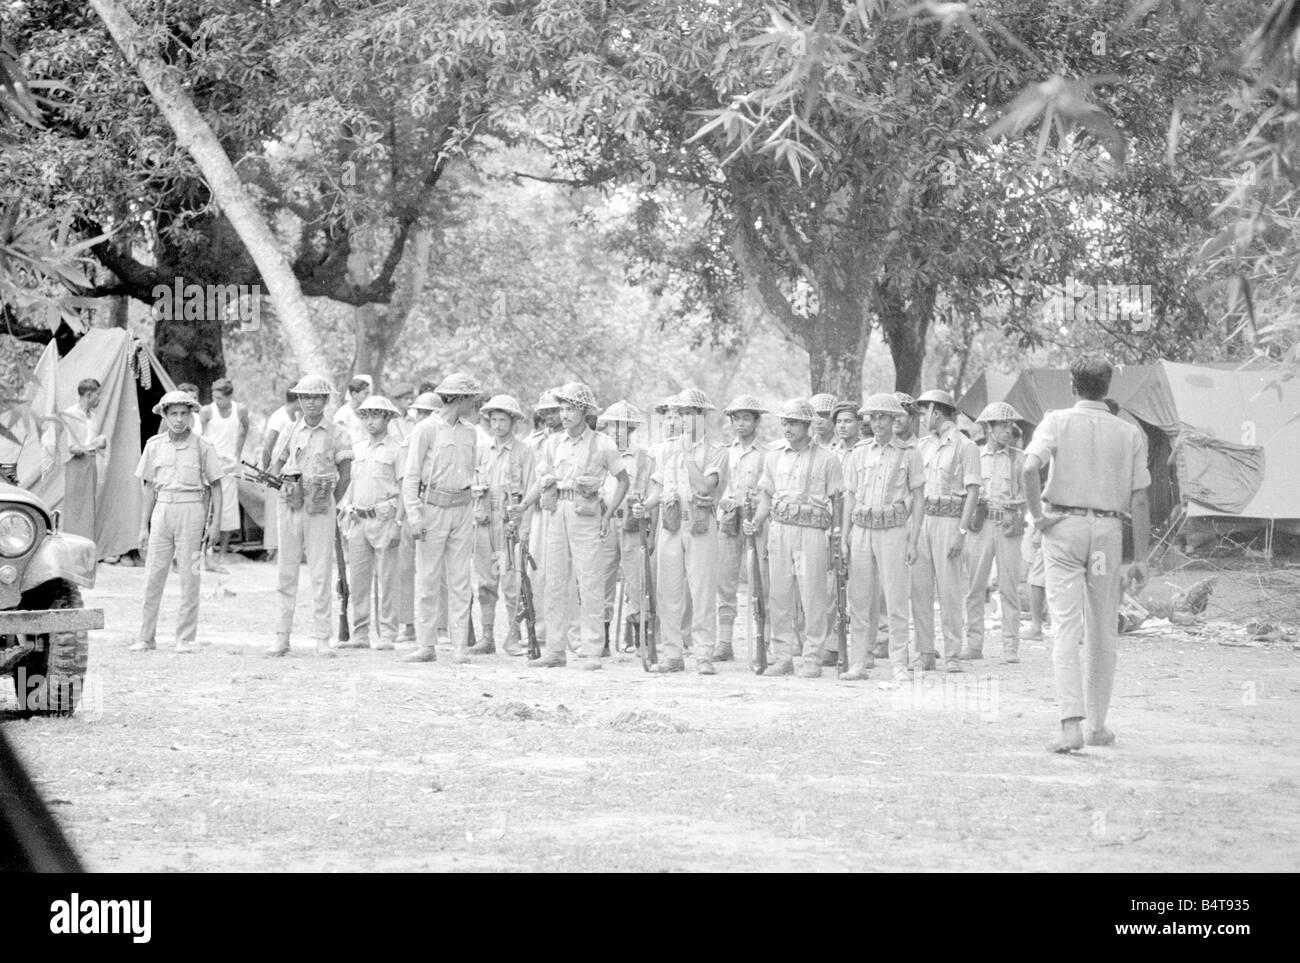 Pakistan - Bangladesh Civil War June 1971;A large area of East Pakistan territory is under the control of the Bangladesh Freedom Fighters. These pictures were taken on patrol with an operational unit whose camp is in the Jungle just inside the Indian border.;Our Picture Shows: Troops in camp preparing to go out on operations Stock Photo